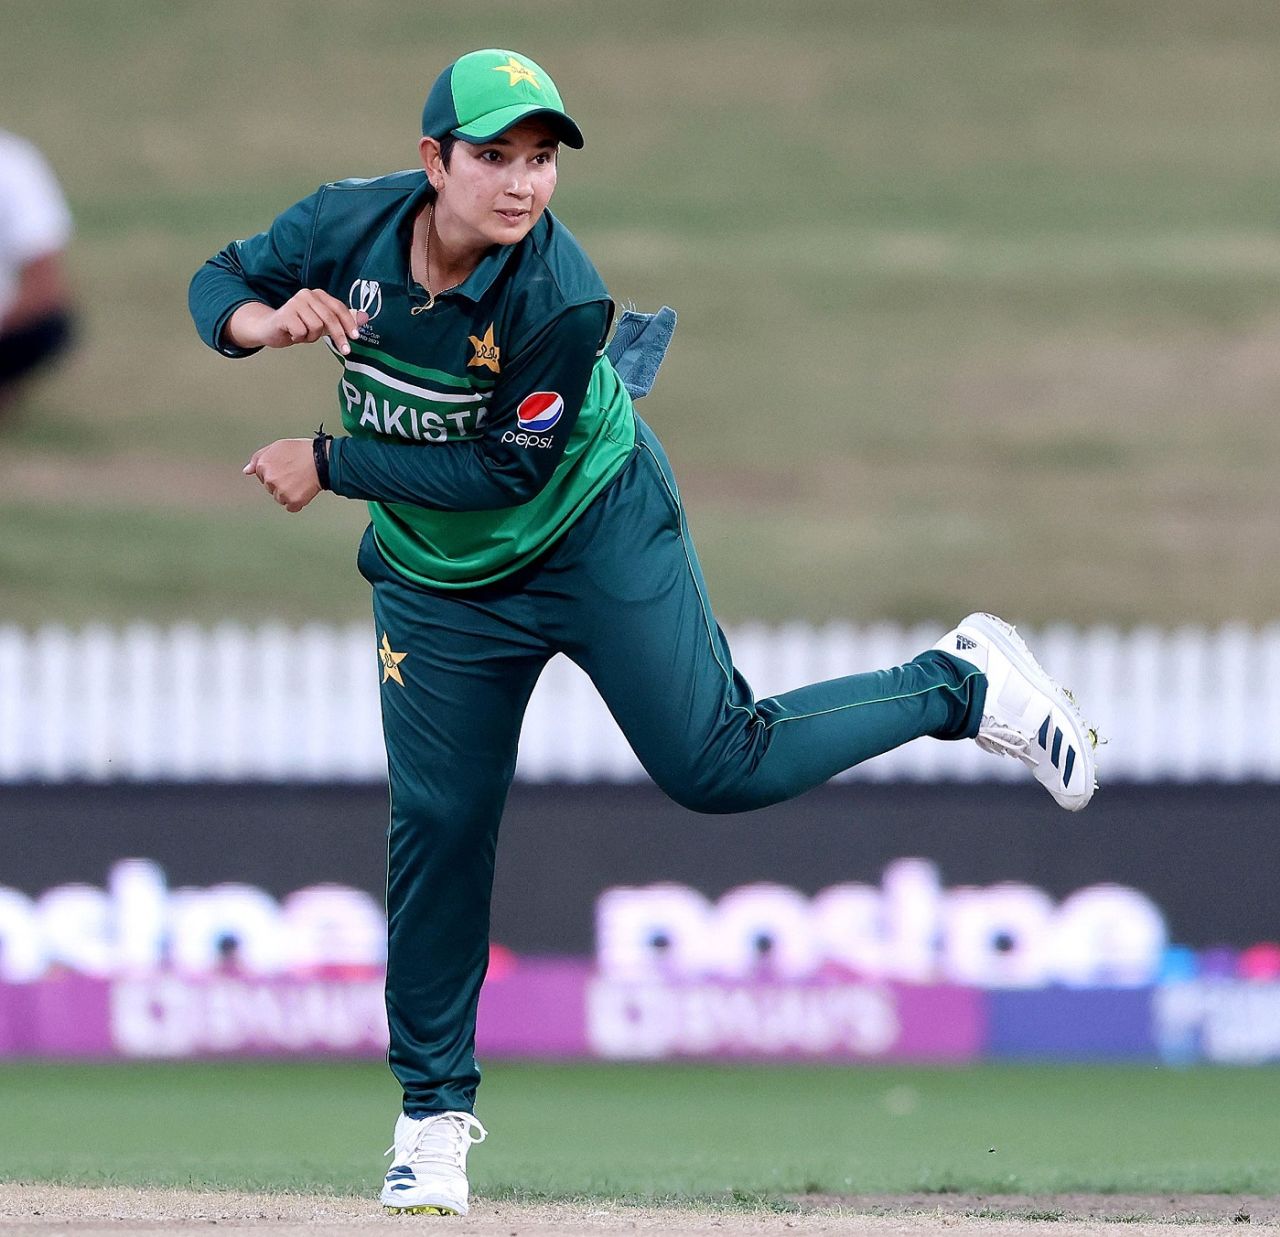 Anam Amin gave away just six runs off her four overs, including a maiden, West Indies vs Pakistan, Women's World Cup 2022, Hamilton, March 21, 2022